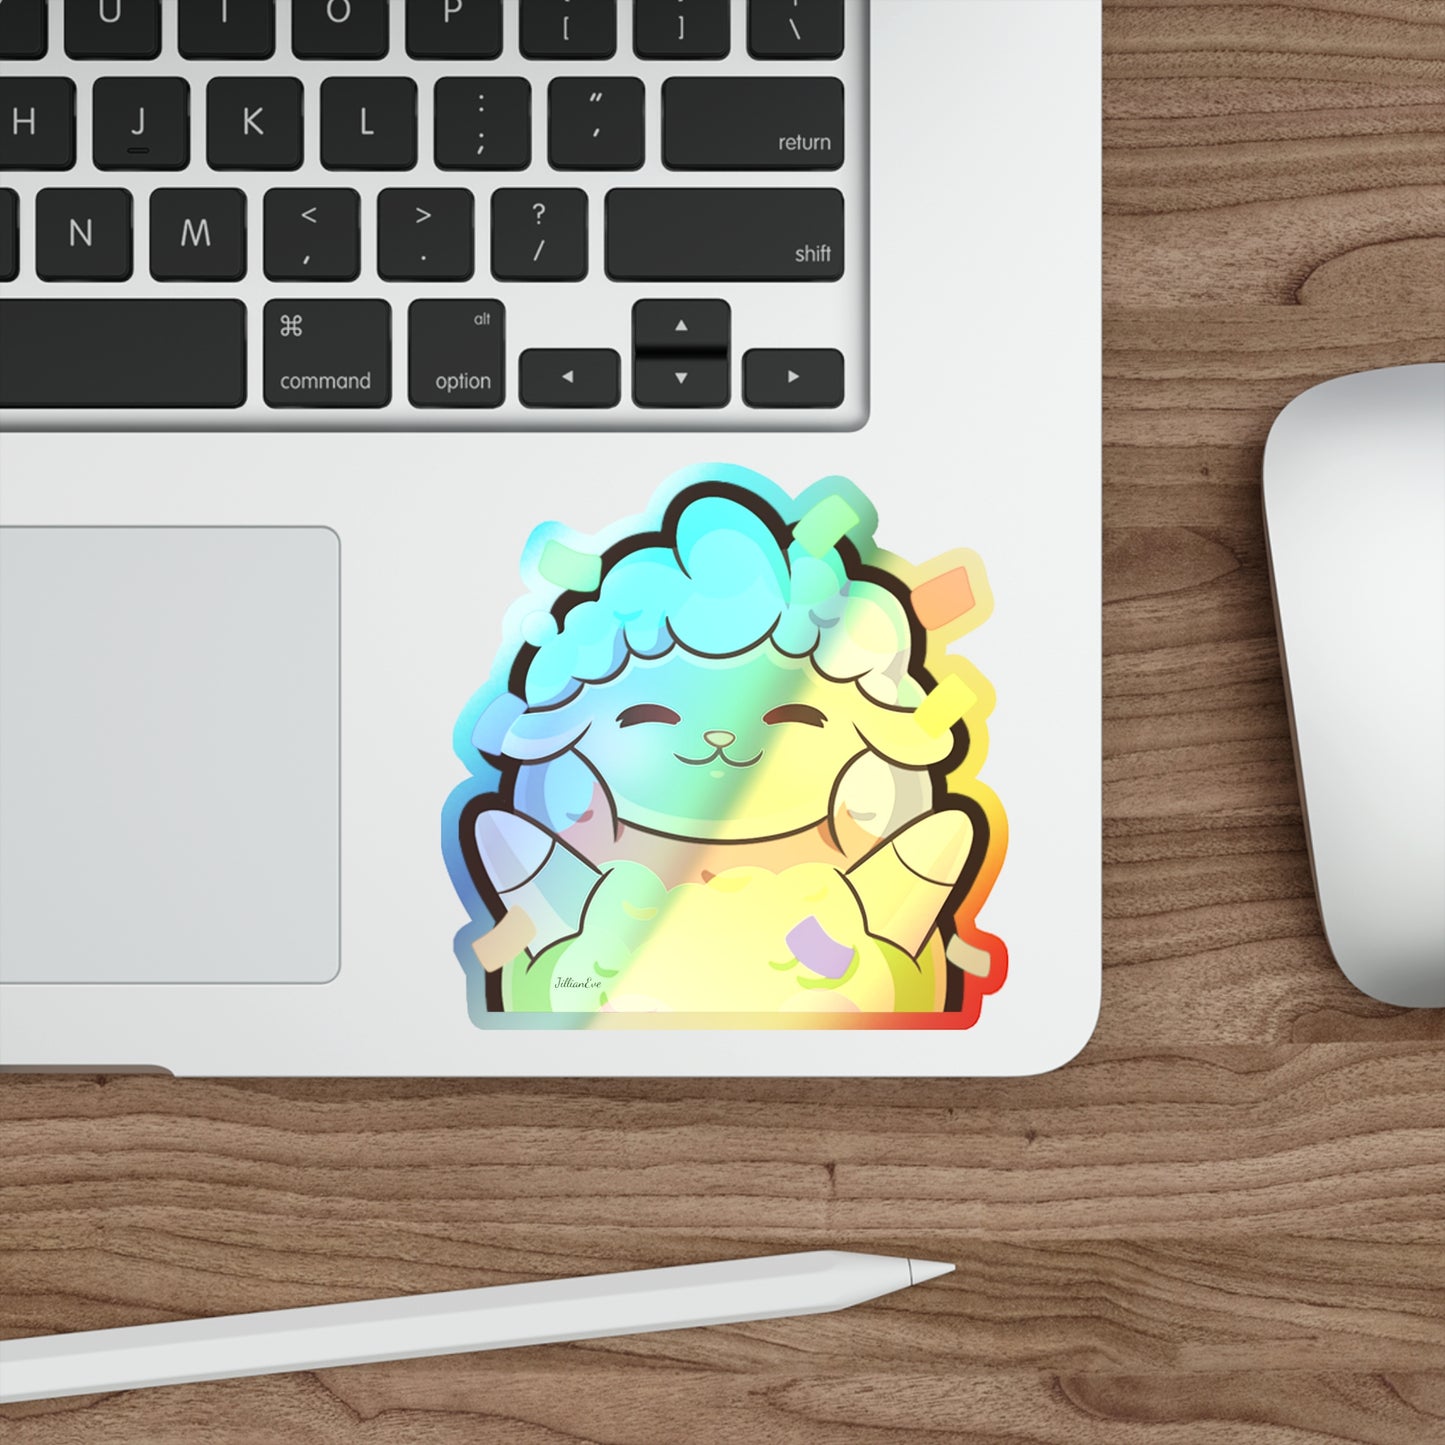 Party Sheep - Holographic Vinyl Sticker